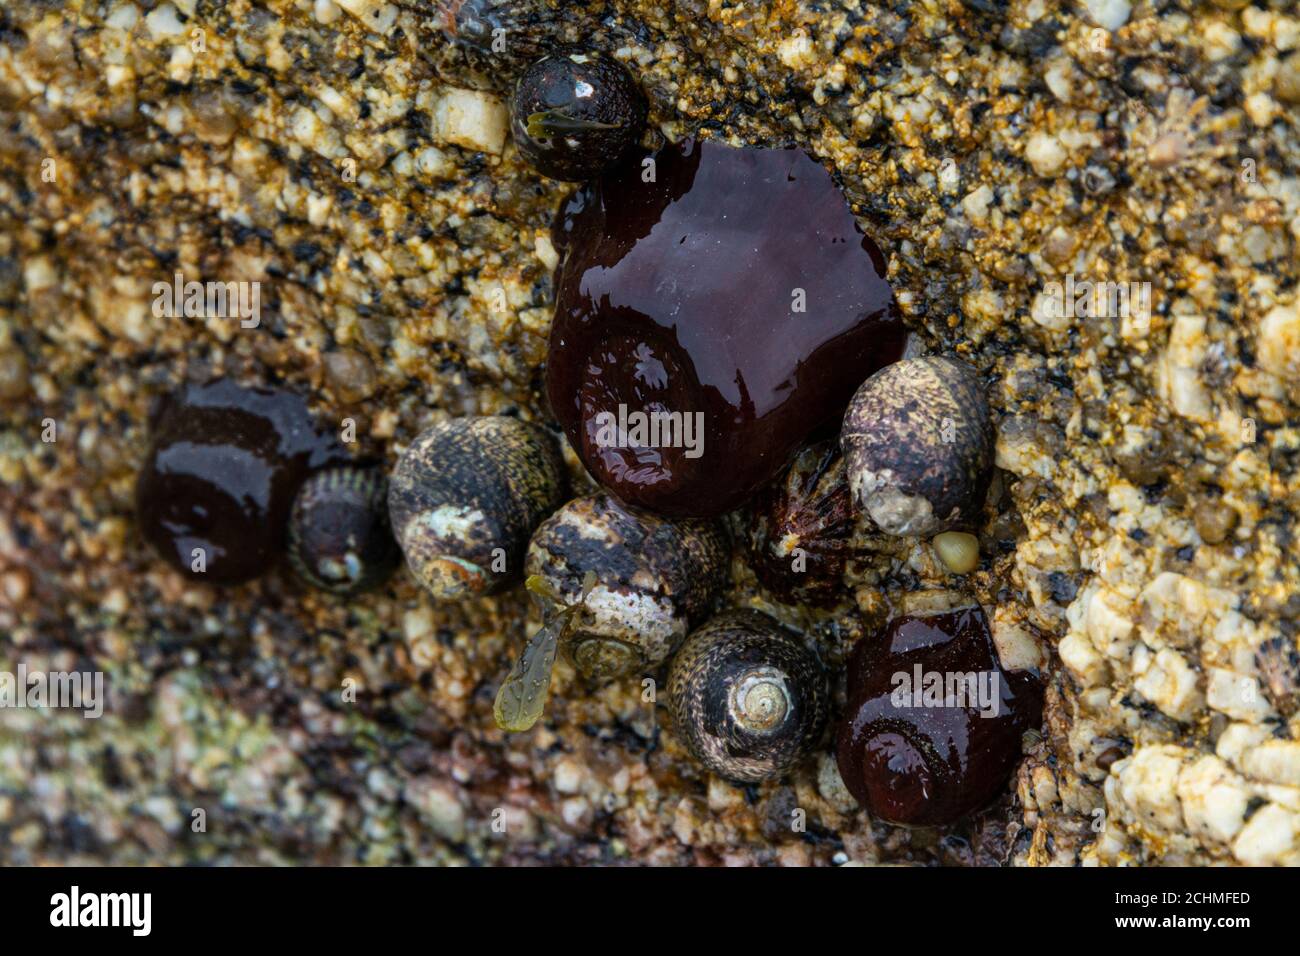 Beadlet anemones (Actinia equina) and snails on a rock out of water Stock Photo